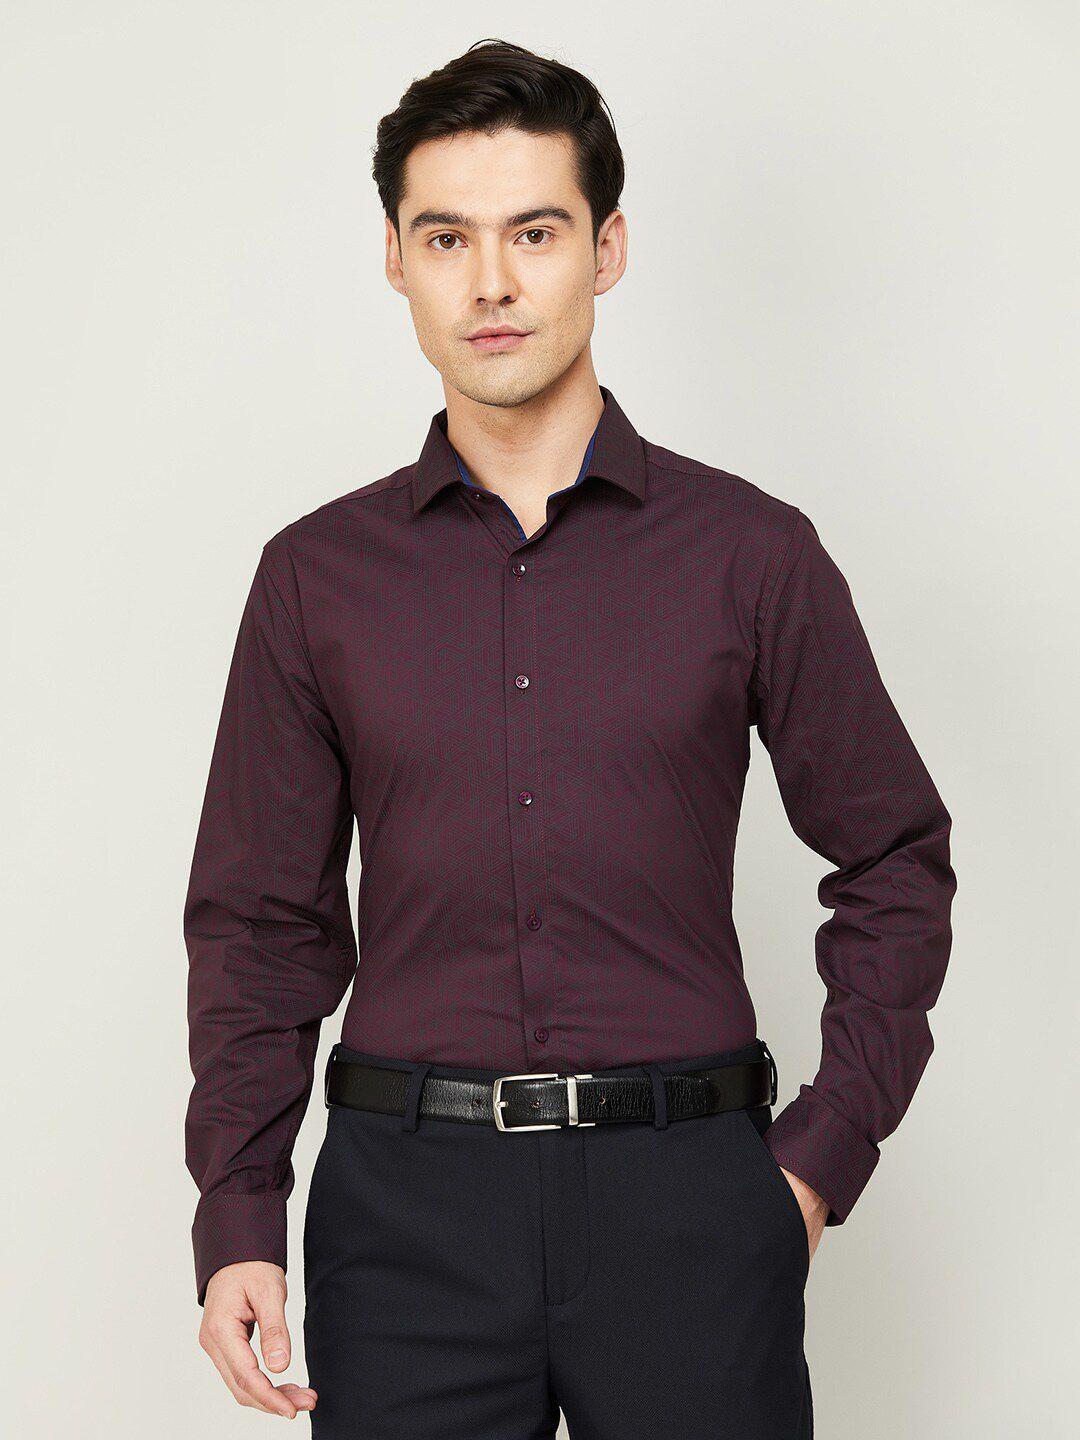 code-by-lifestyle-men-maroon-slim-fit-printed-casual-cotton-shirt